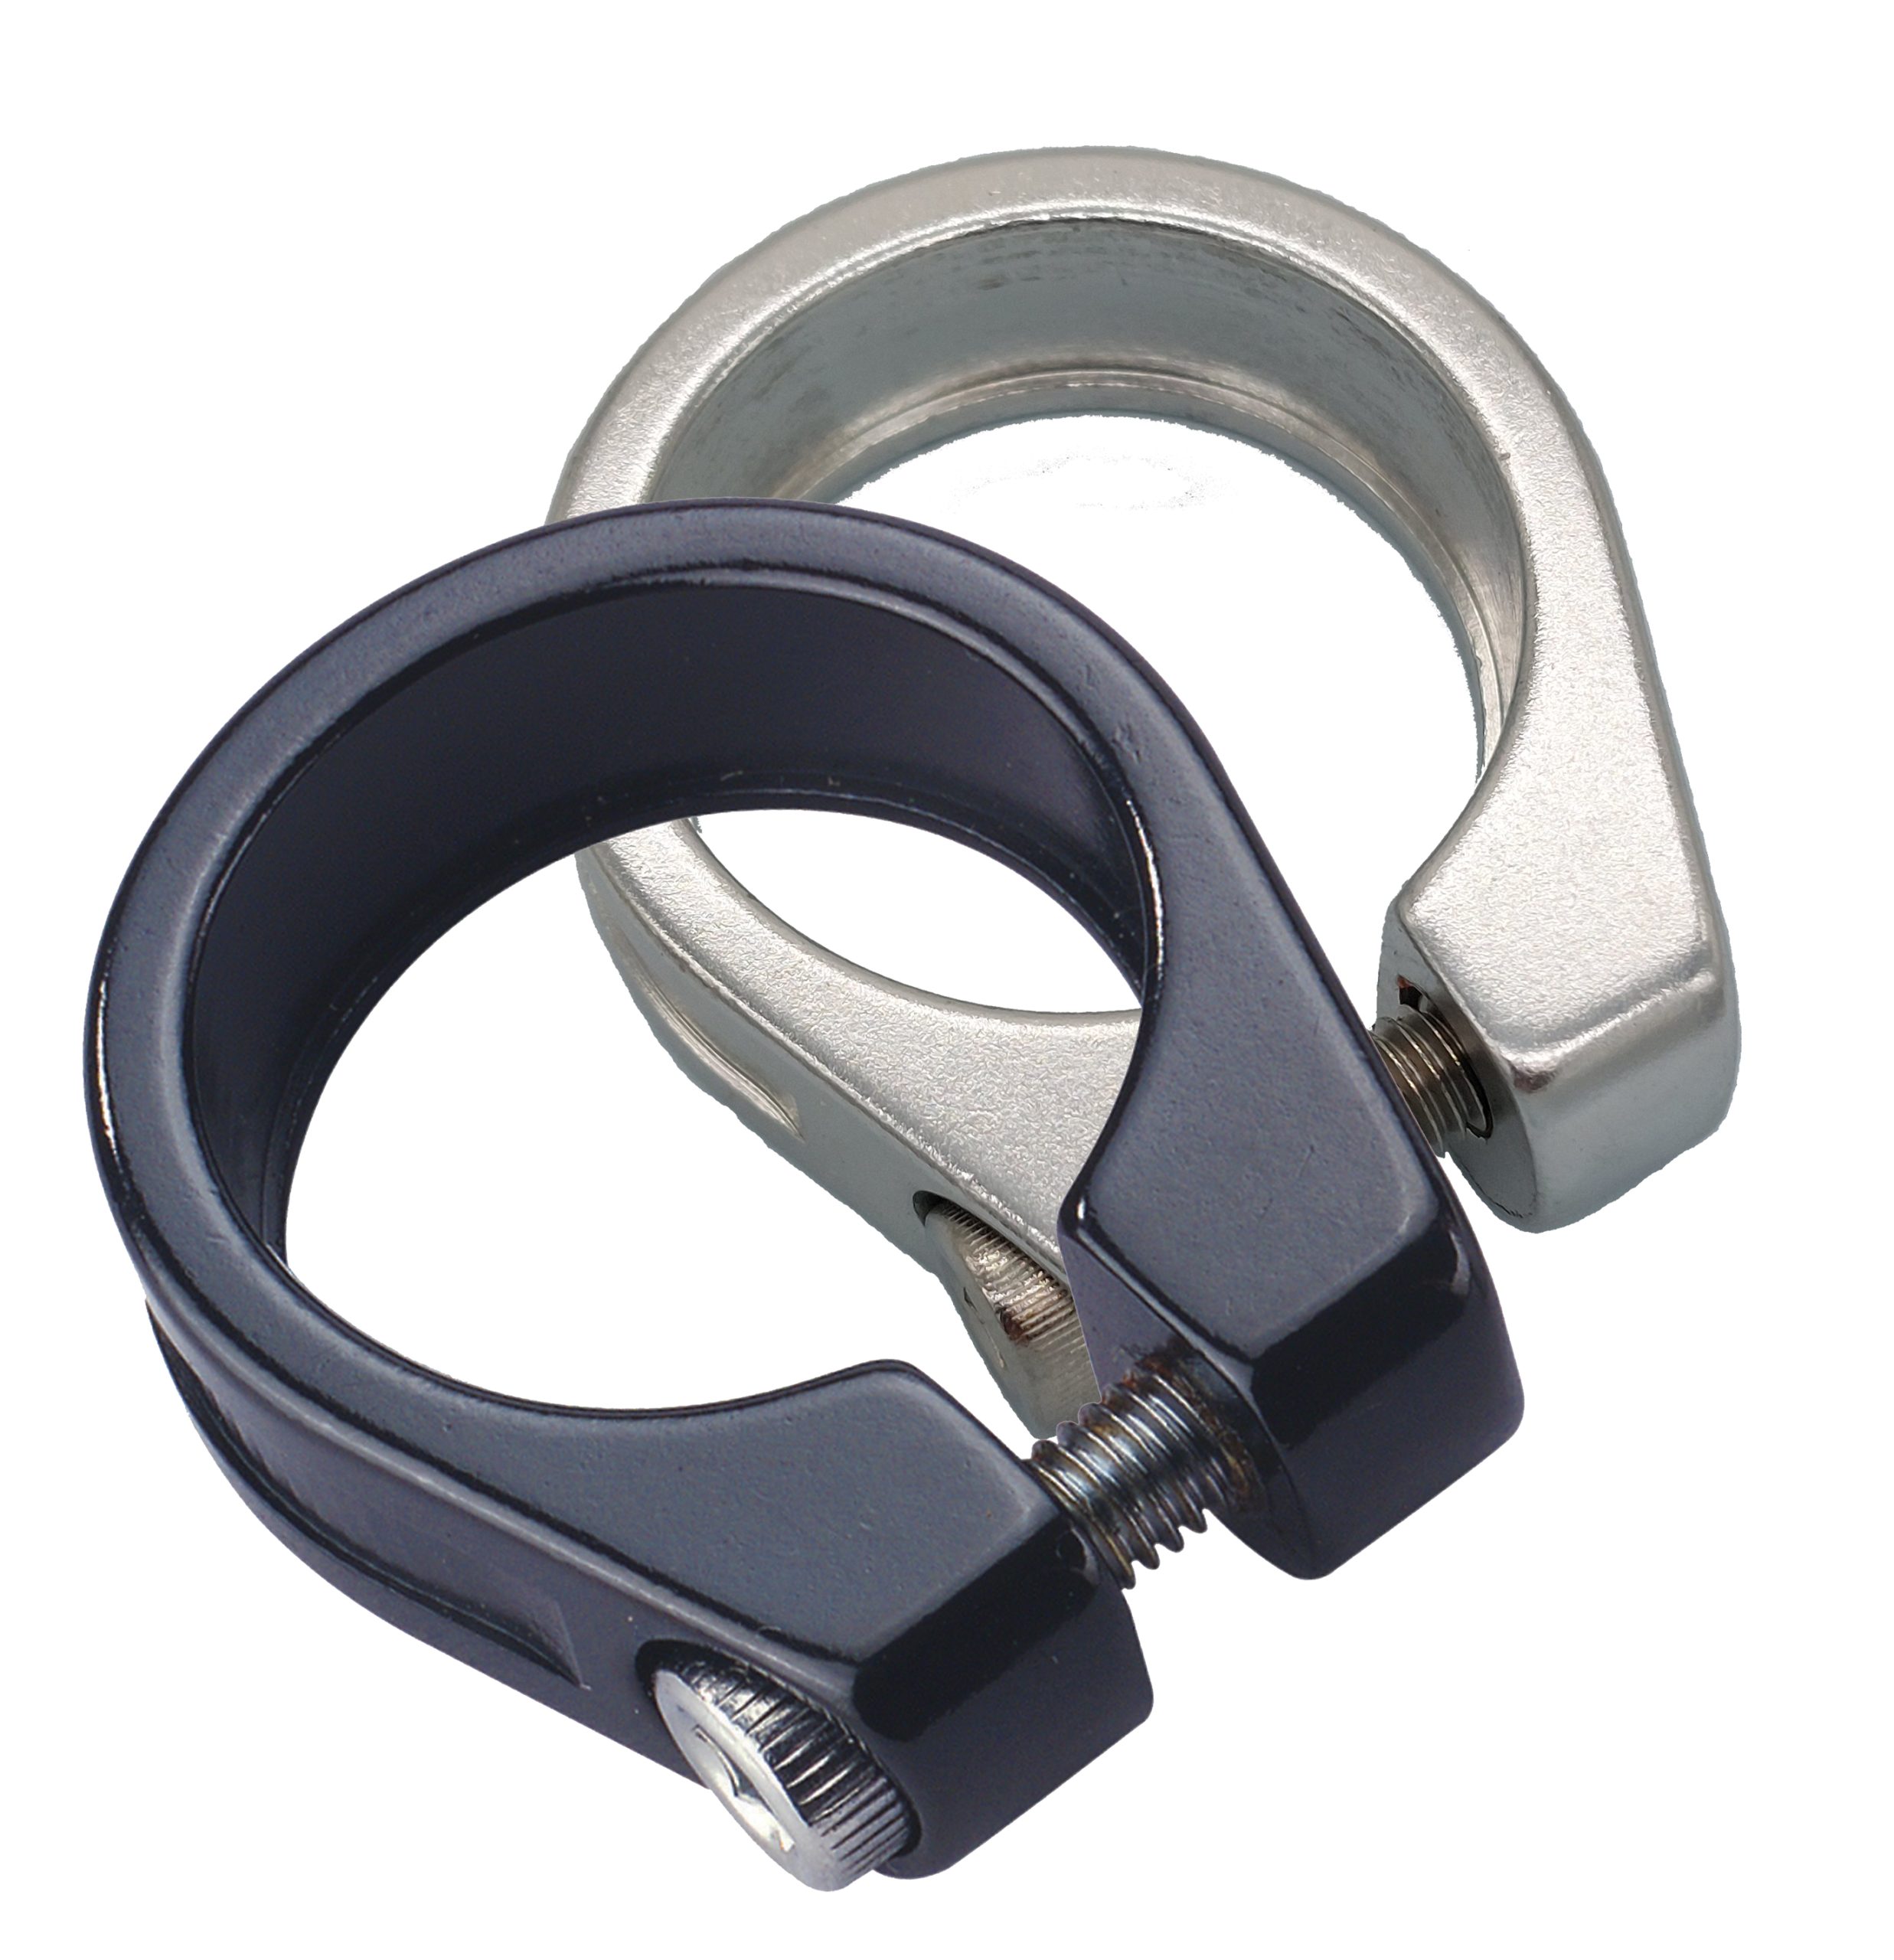 AQR23058Z Acor Black 31.8mm Forged Alloy Bolt Seat Clamp